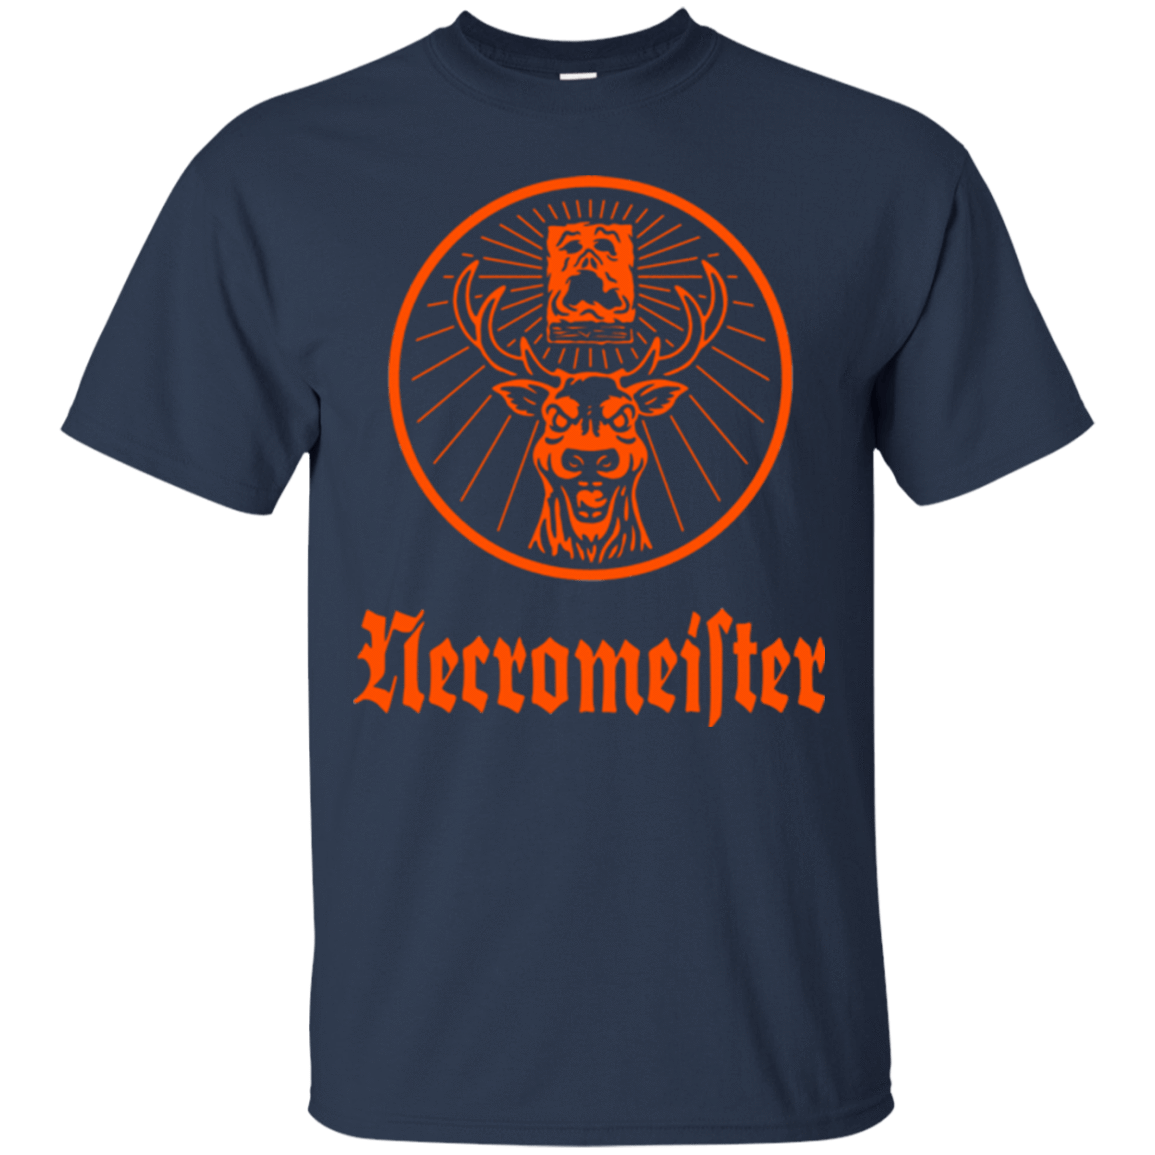 T-Shirts Navy / Small NECROMEISTER T-Shirt